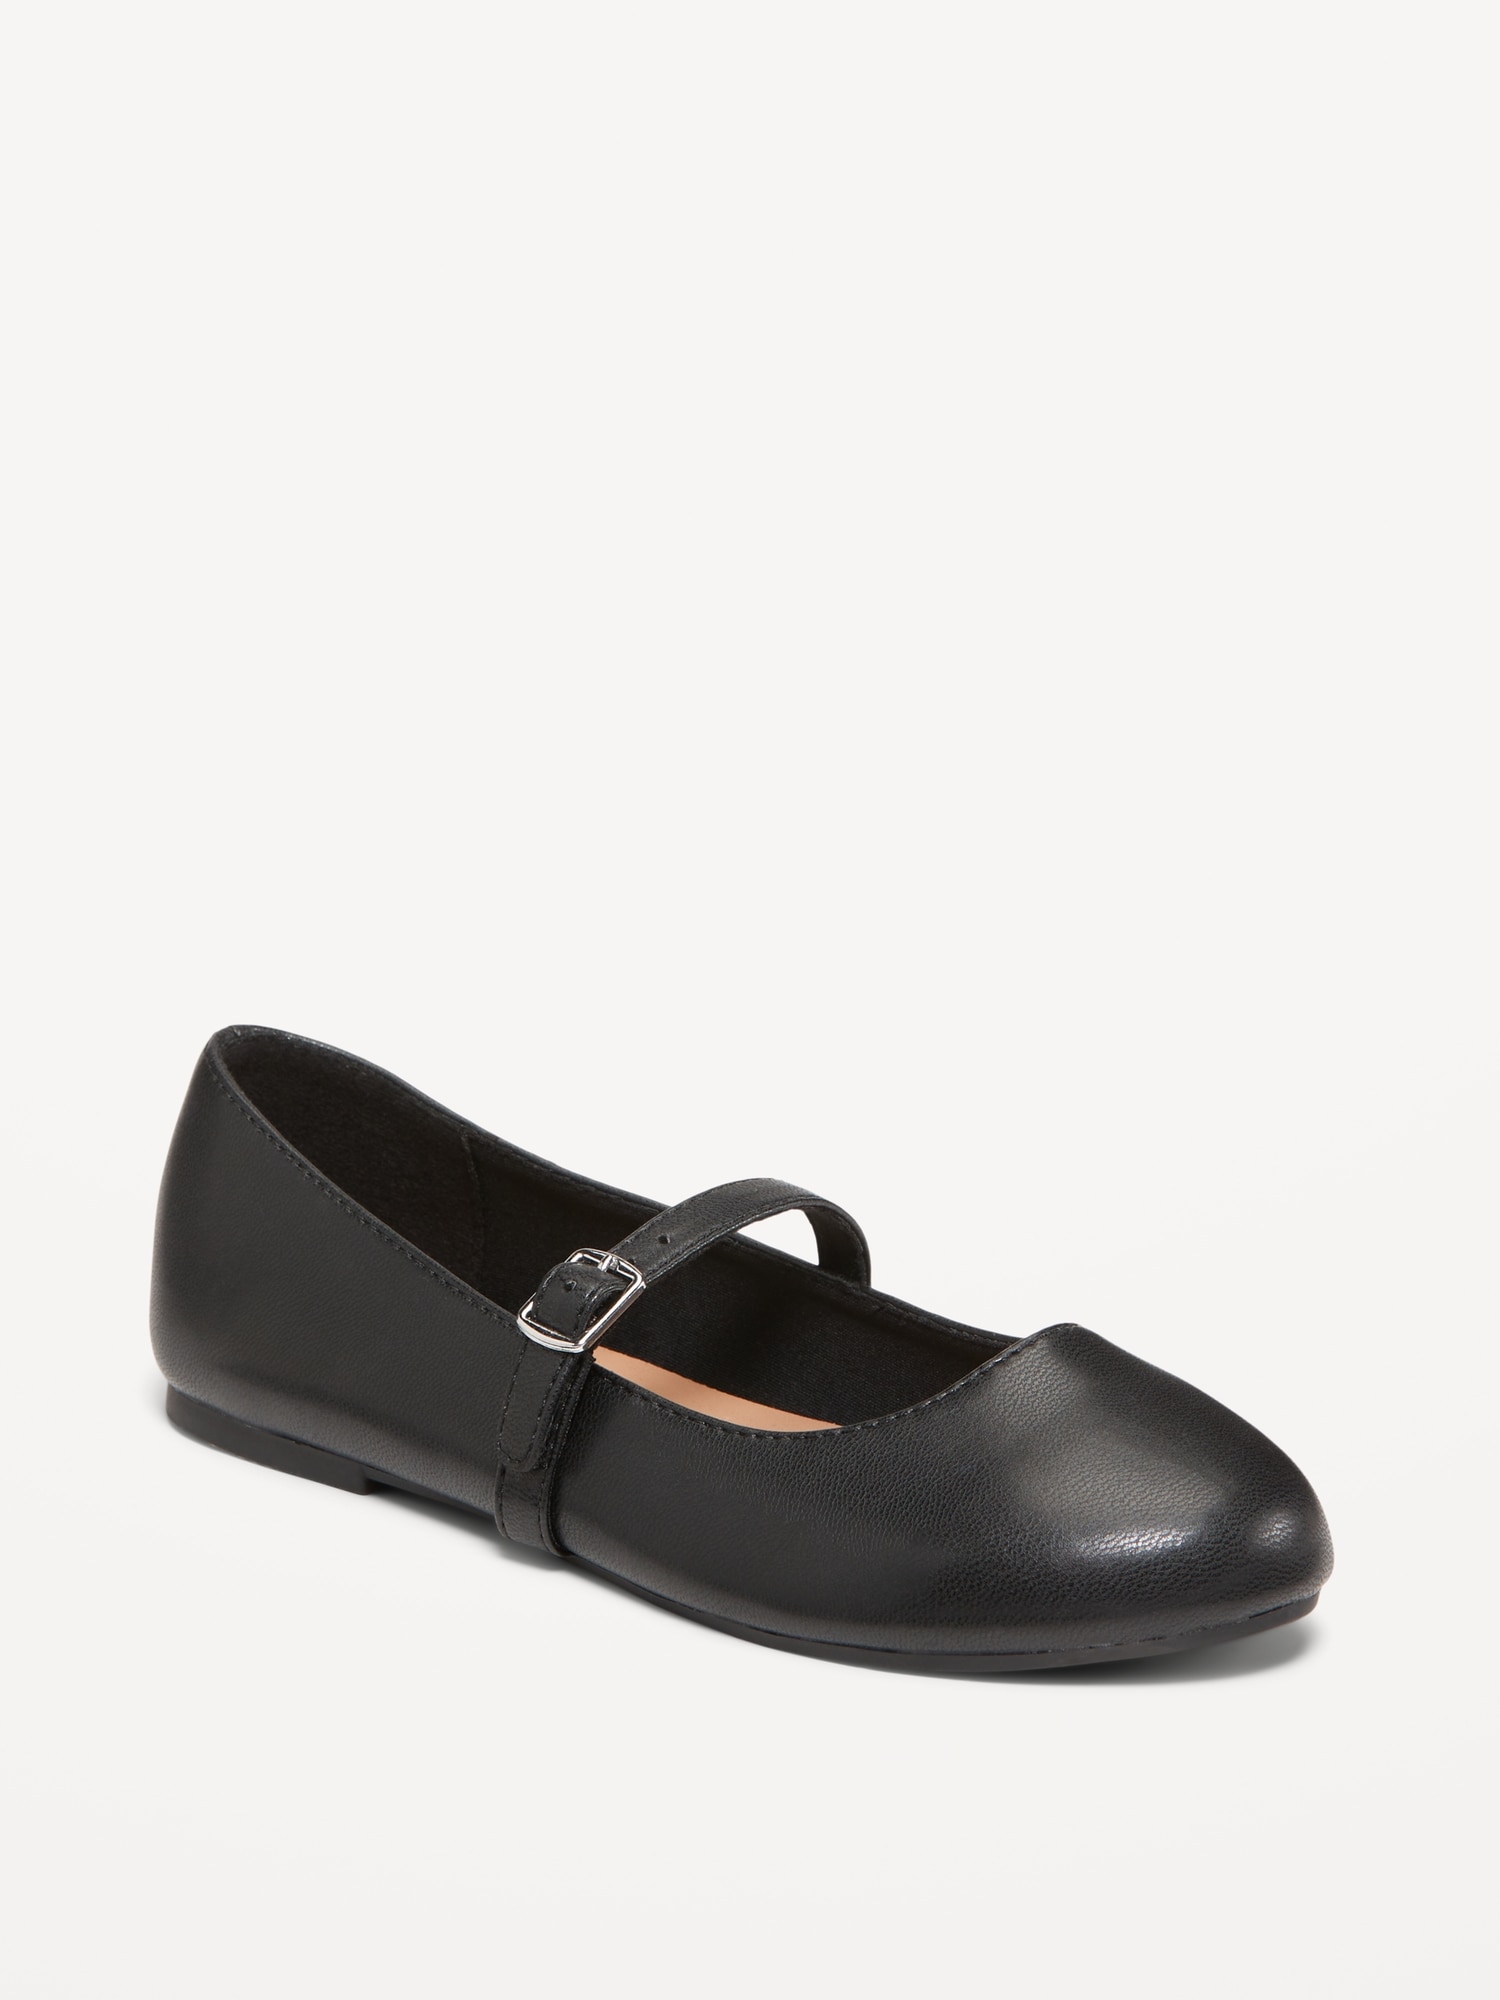 Faux-Leather Ballet Flats for Girls